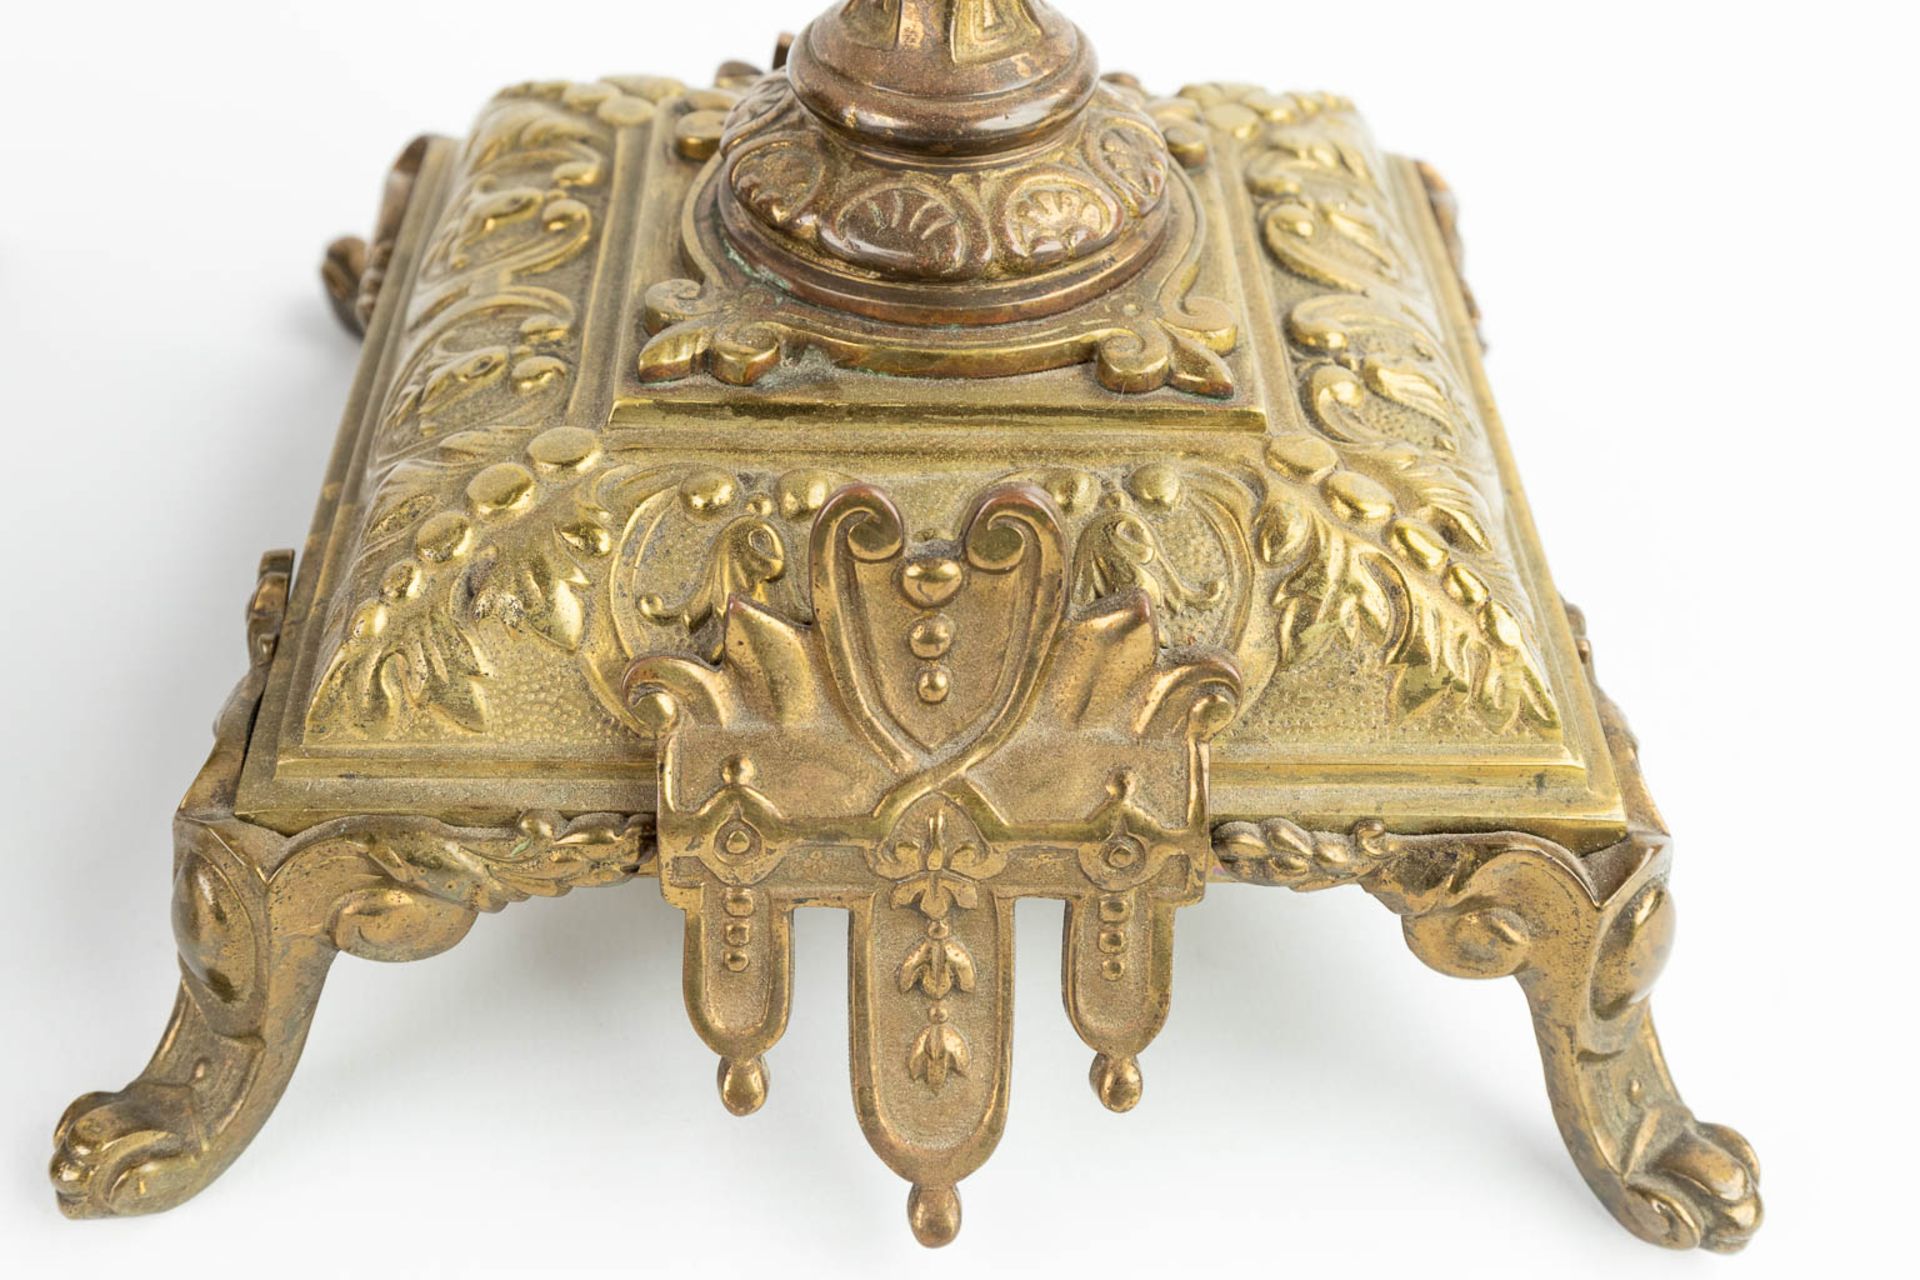 A three-piece mantle garniture clock and candelabra, made of bronze. (20 x 29 x 45cm) - Image 17 of 17